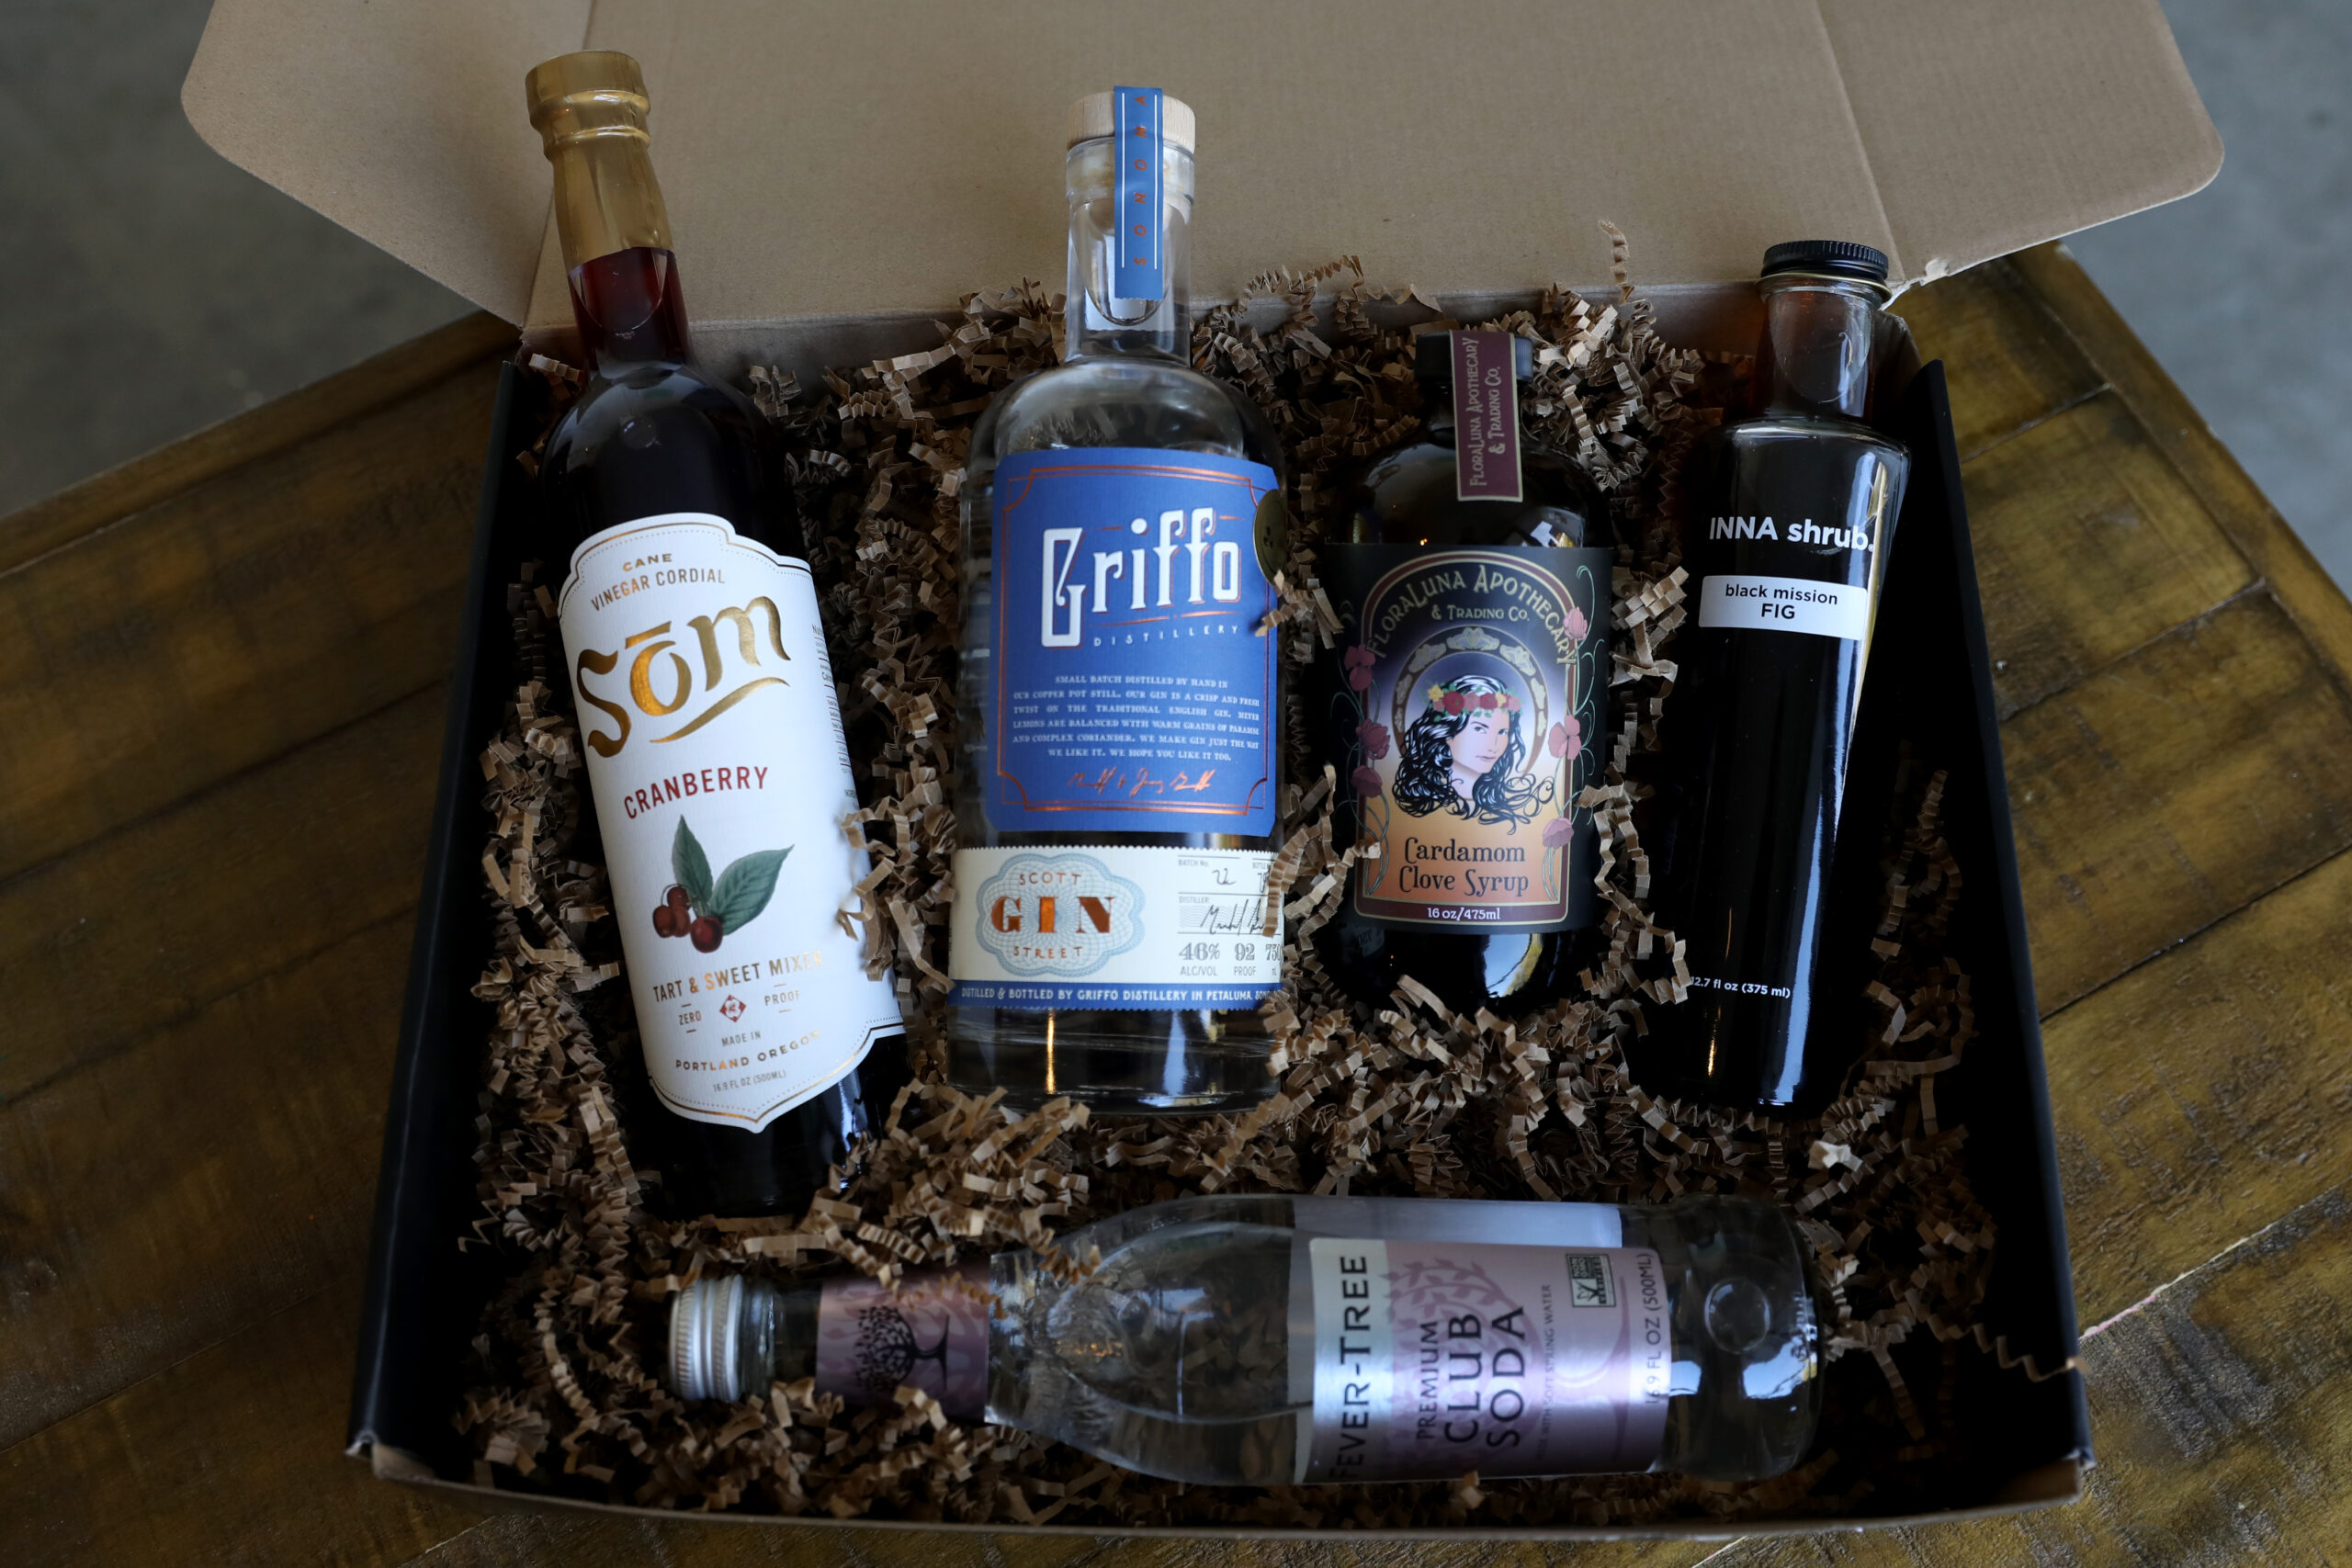 The Gin Cranberry Clove cocktail kit, includes Griffo Scott Street Gin, Cranberry Som Shrub, FloraLuna Cardamon Clove Syrup, INNA Mission Fig Shrub, and Fever Tree Club Soda, at the Griffo Distillery and Tasting Bar in Petaluma, Calif., on Thursday, December 2, 2021.(Beth Schlanker/The Press Democrat)